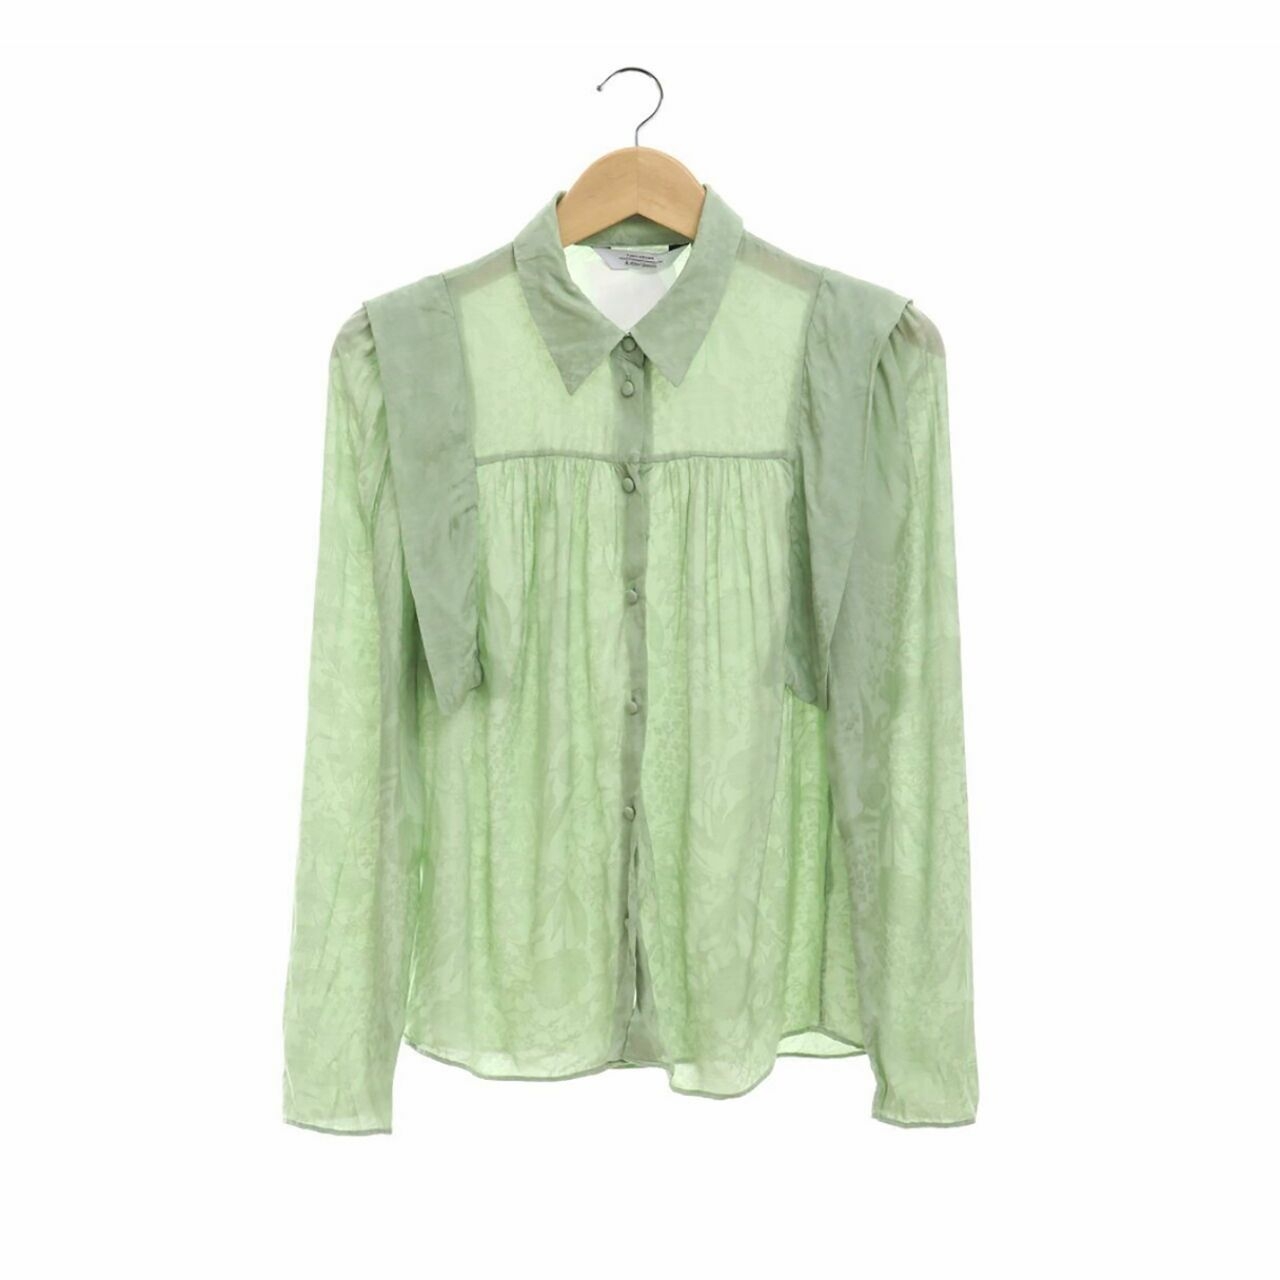 & Other Stories Sage Green Blouse